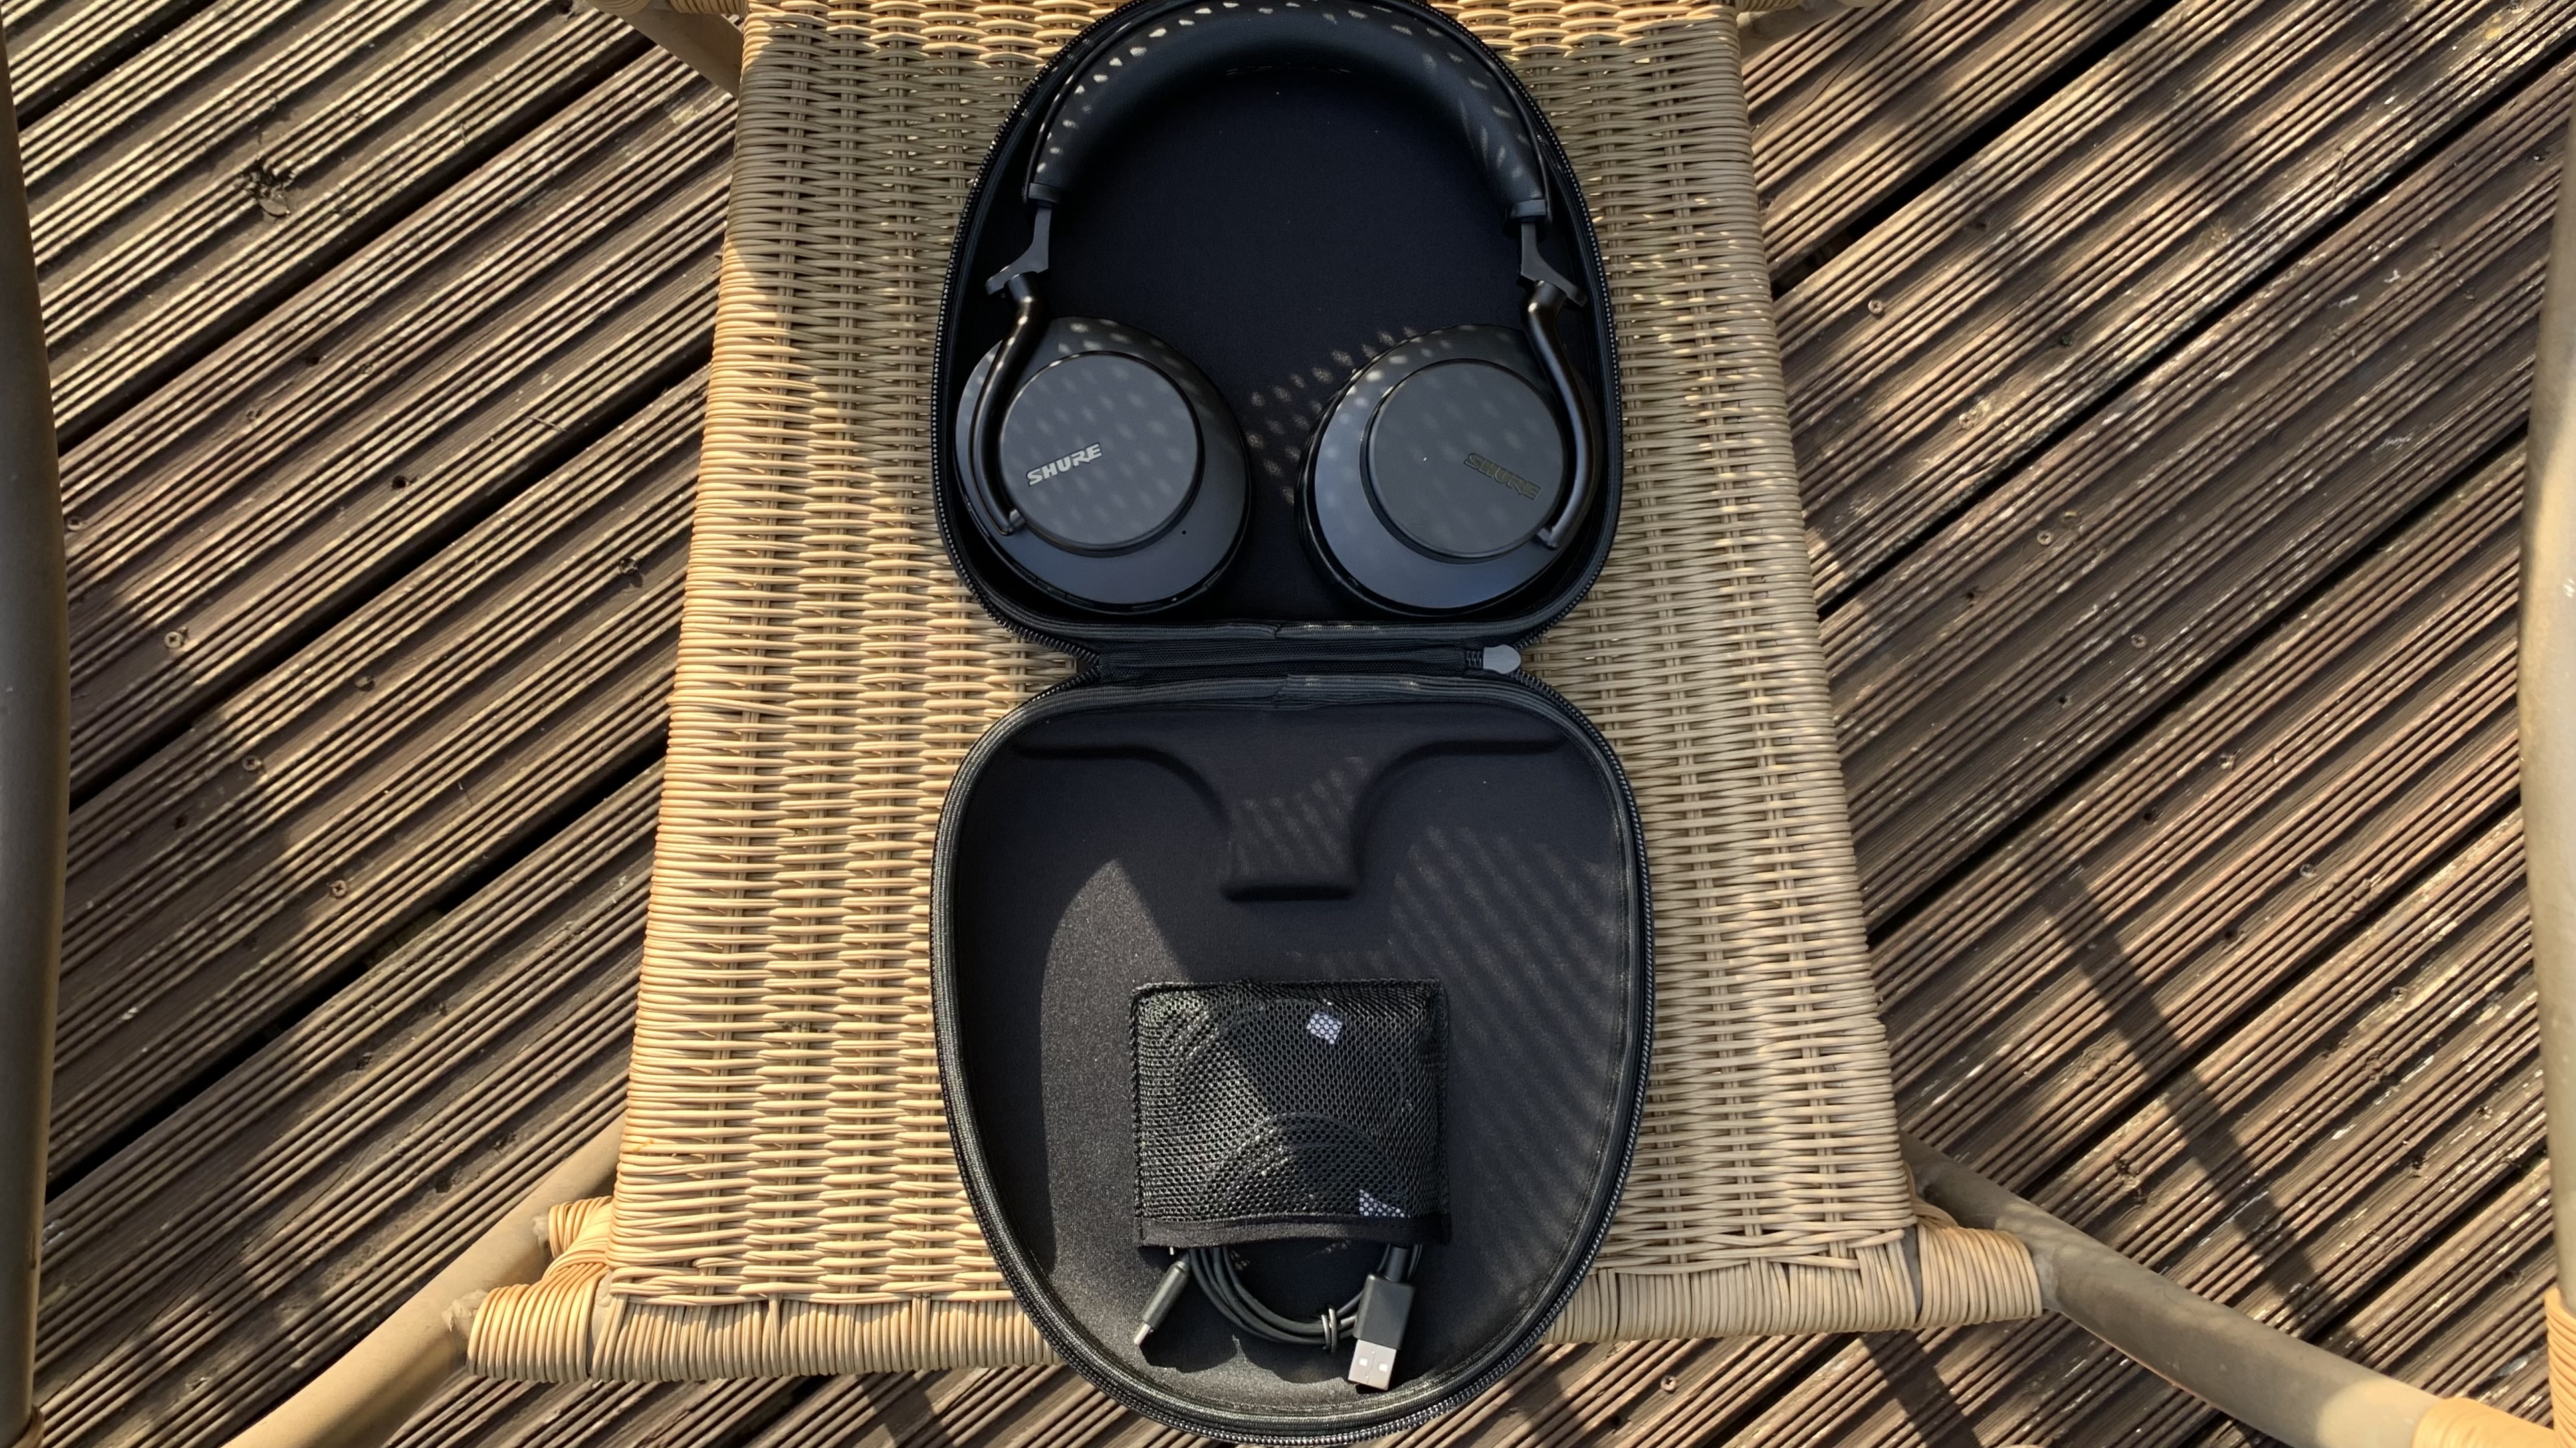 Shure Aonic 50 Gen 2 in their hard travel case, on a wicker chair